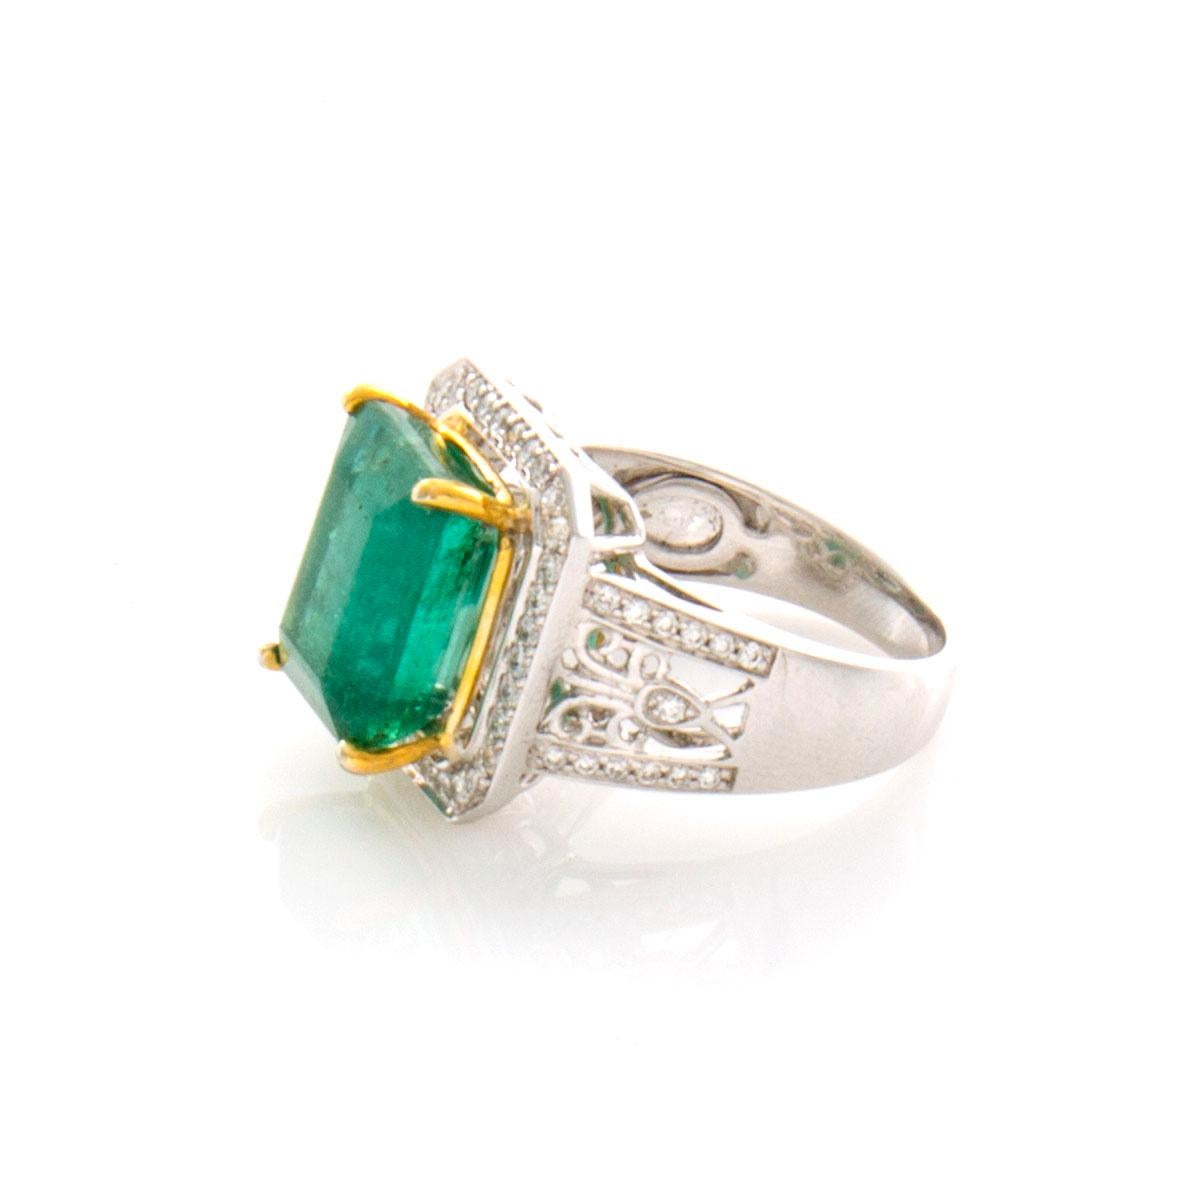 GIA Certified 7.65 Carat Emerald Diamond Ring 14 Karat White and Yellow Gold In Excellent Condition For Sale In Mobile, AL